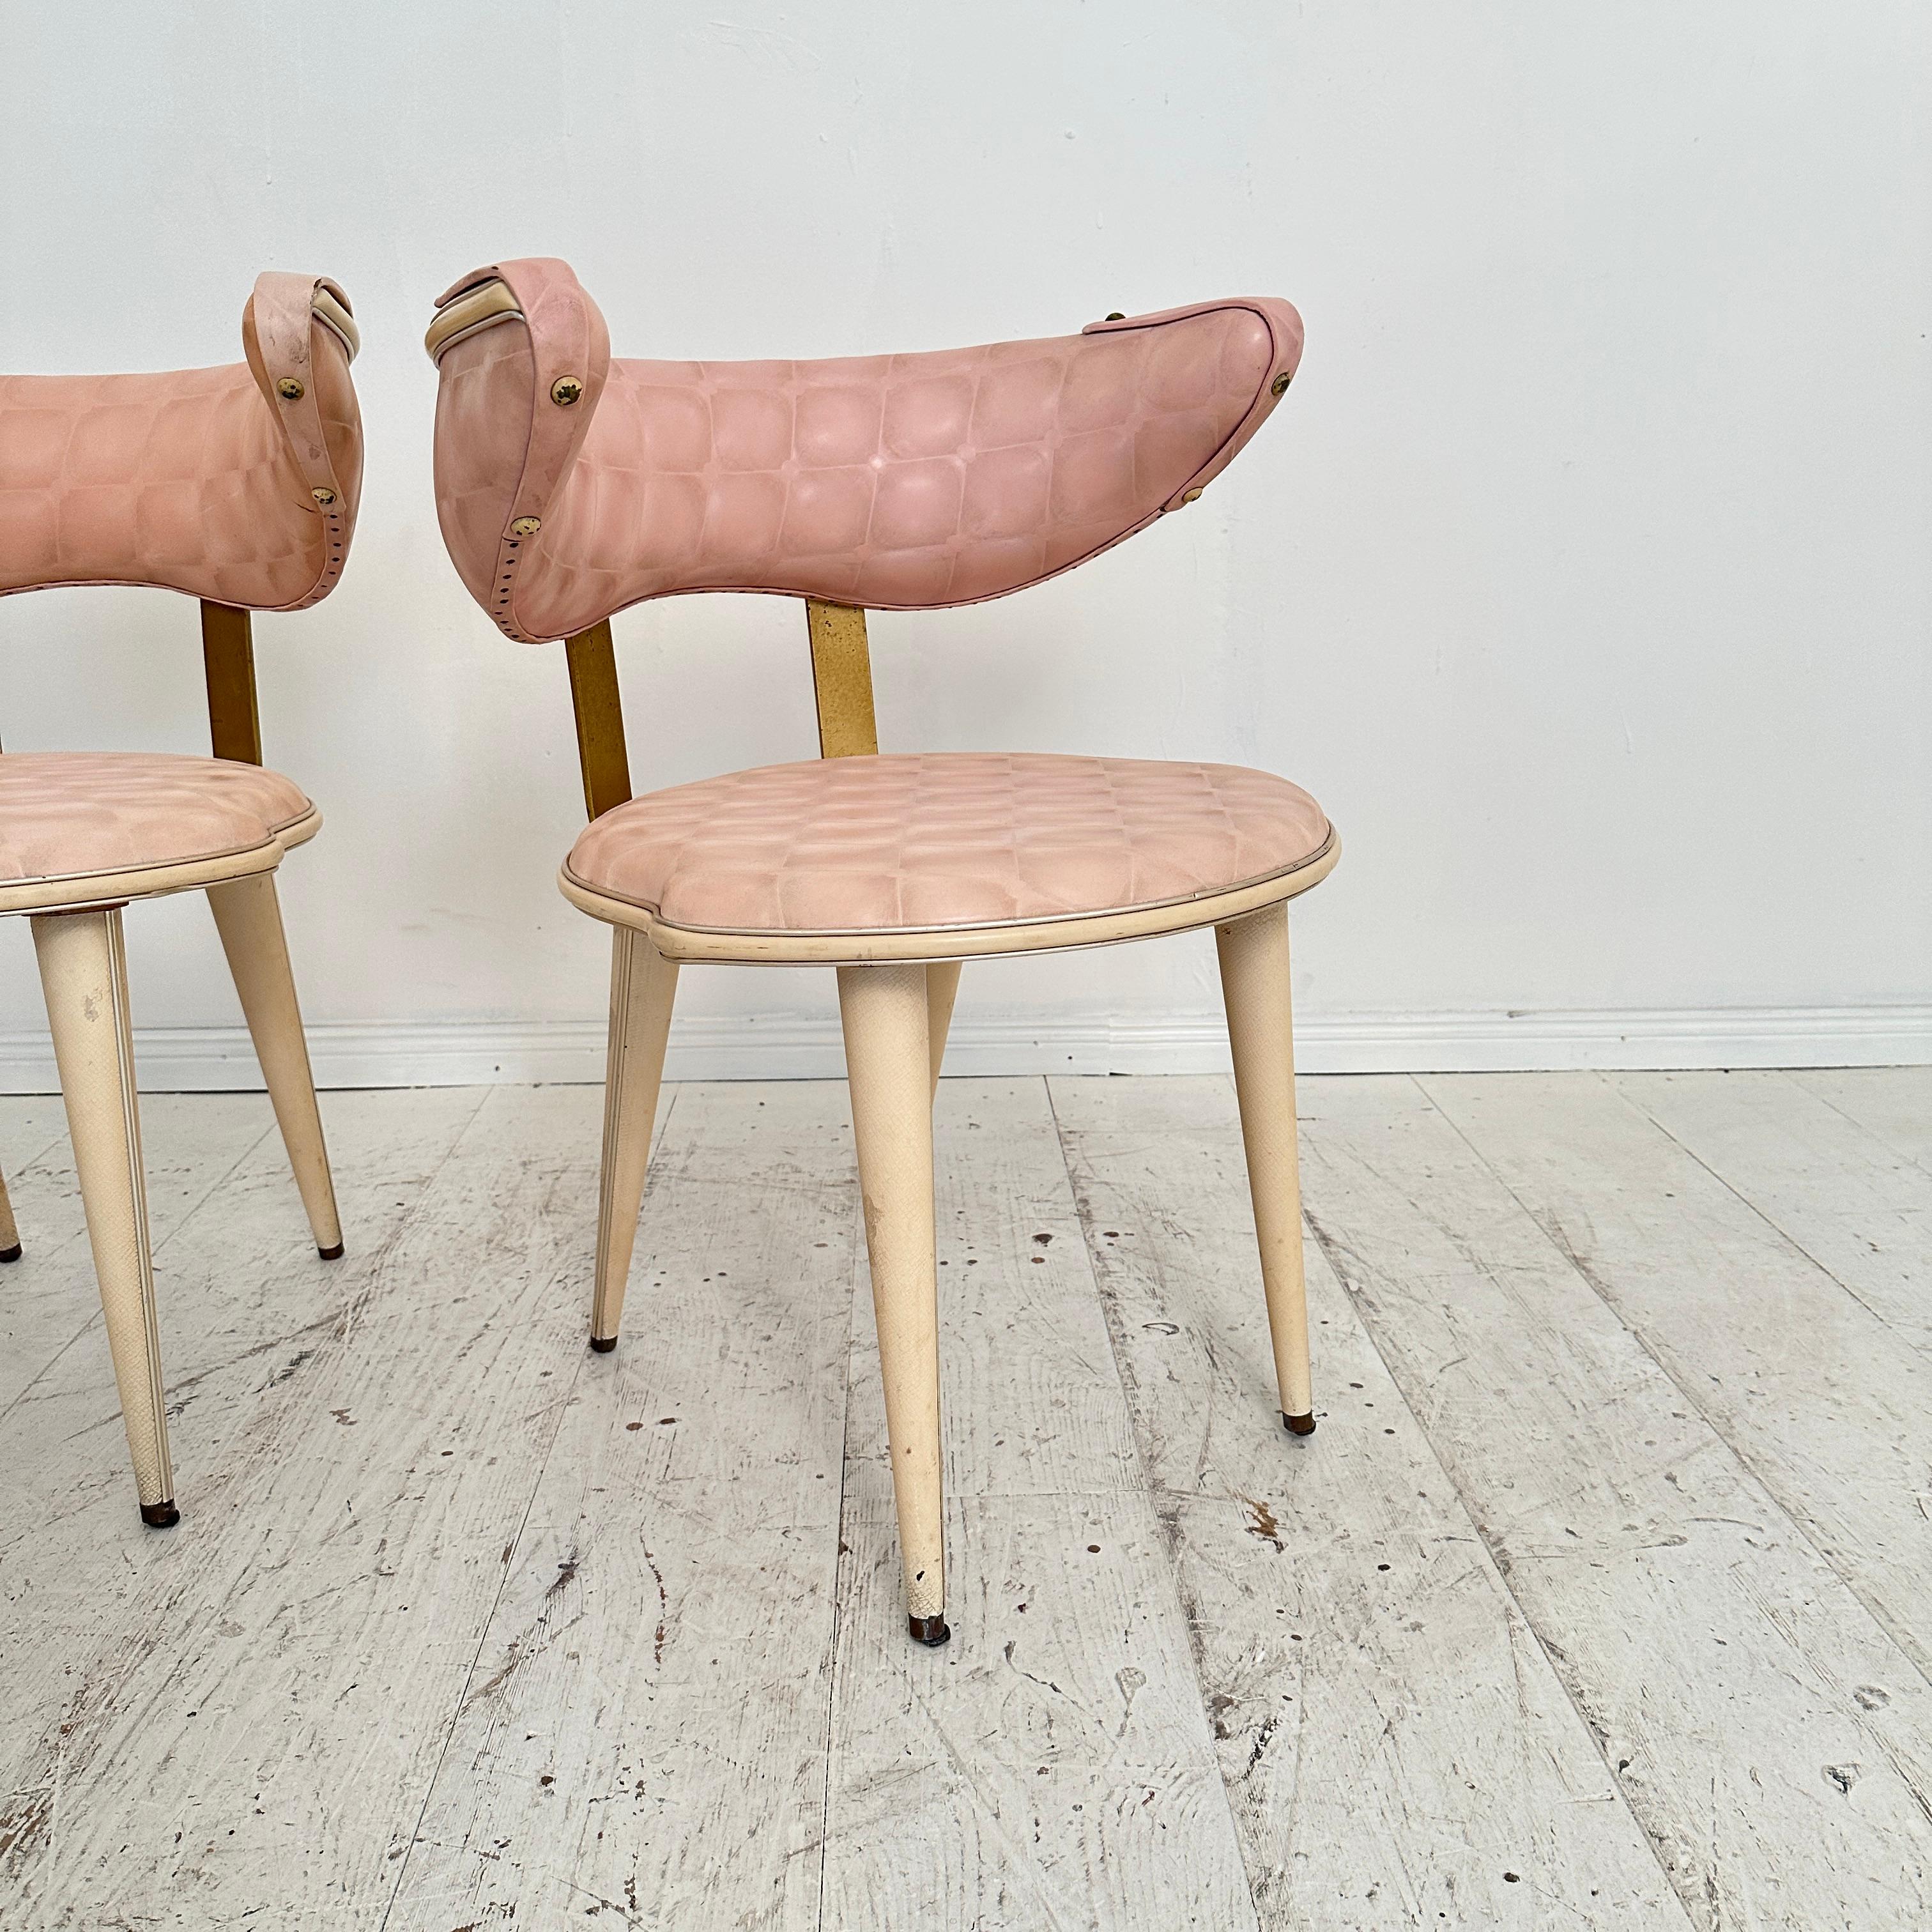 Pair of Mid Century Armchairs by Umberto Mascagni, light pink and white, 1954 For Sale 3